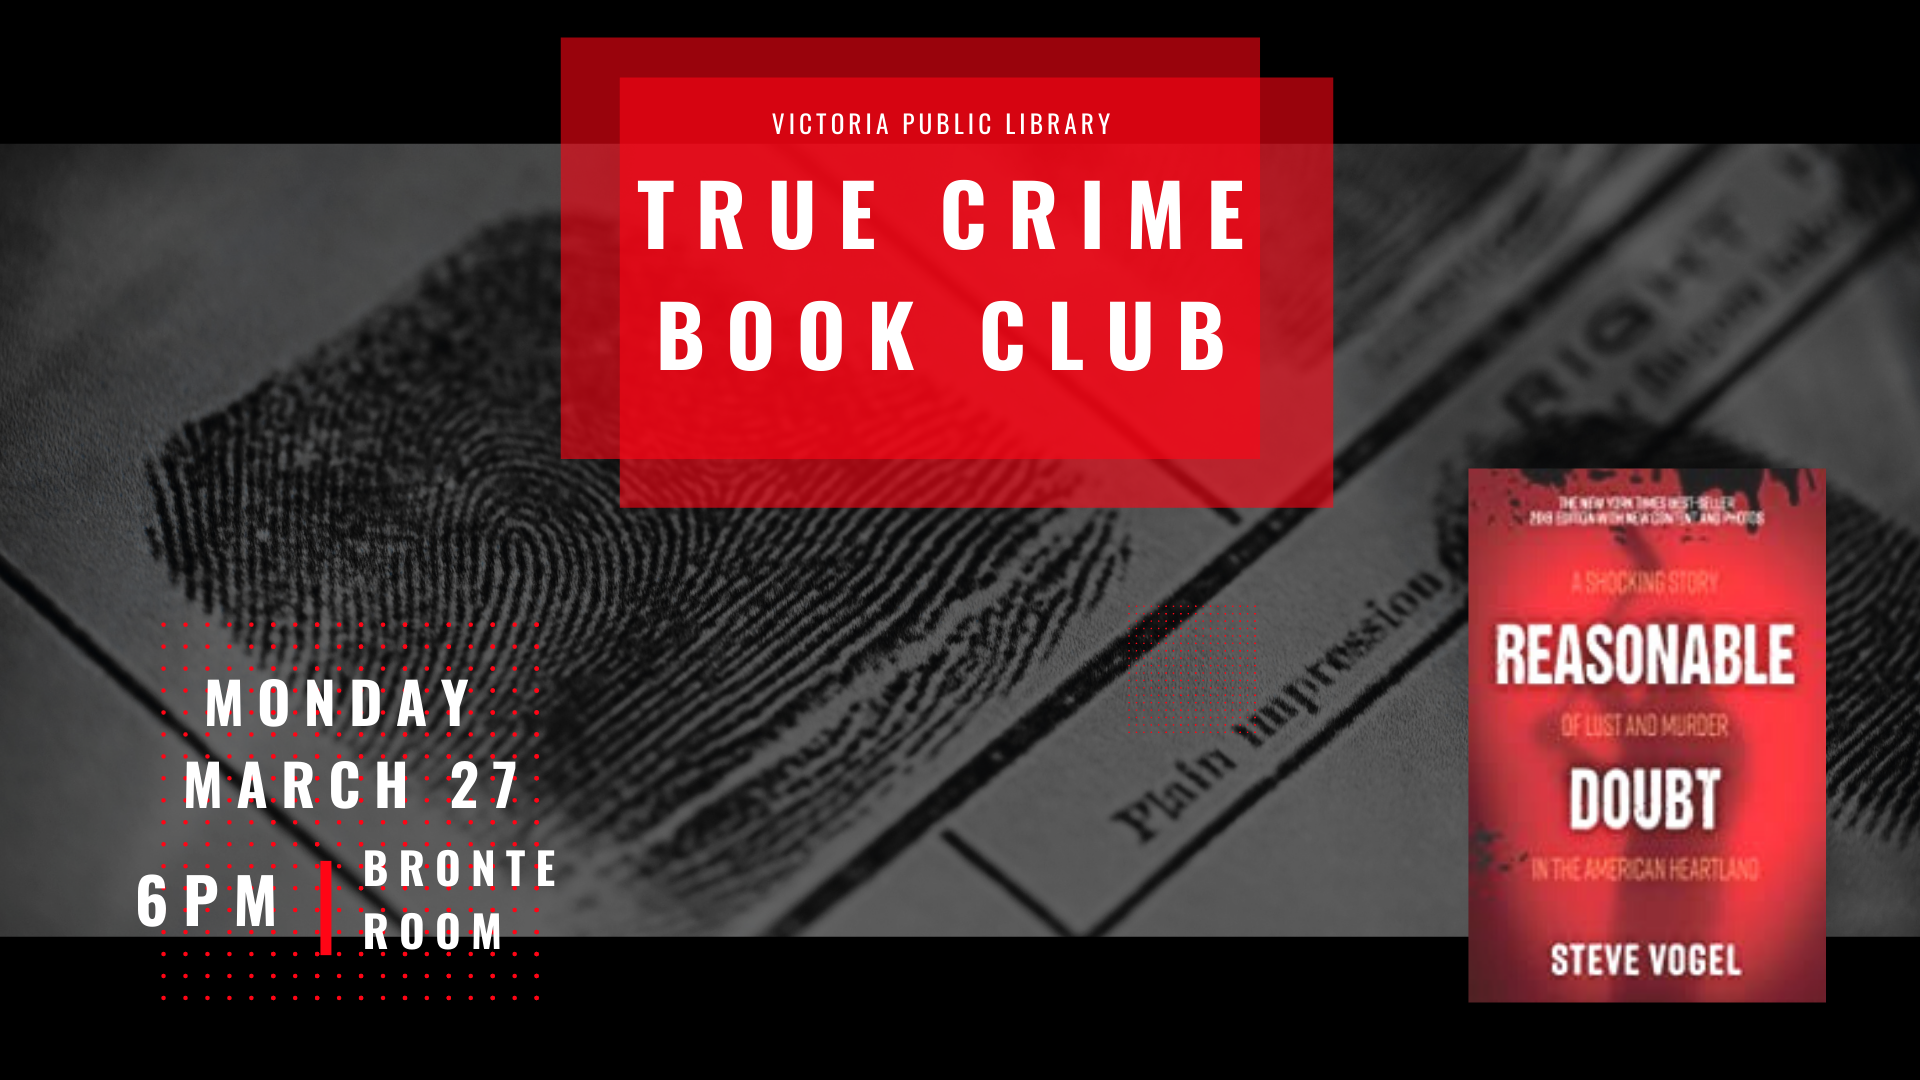 True Crime Book Club, March 27 at 6pm, Reasonable Doubt by Steve Vogel